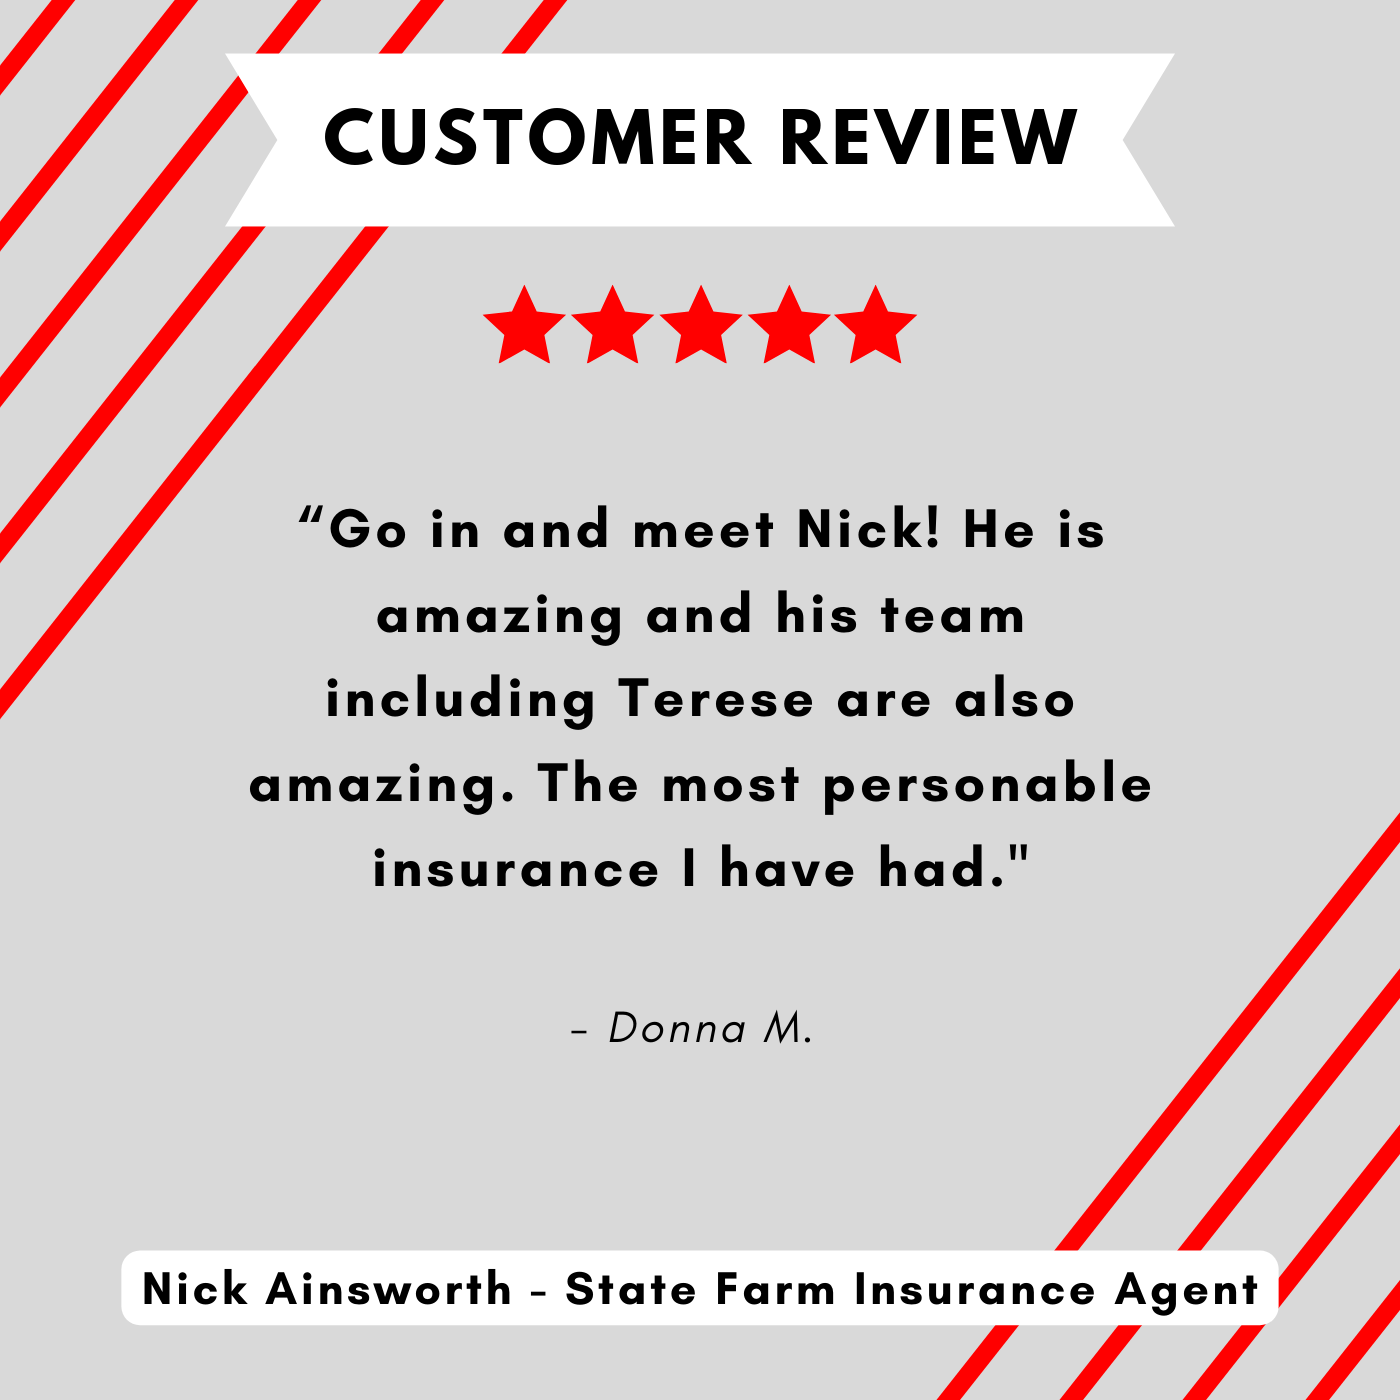 Nick Ainsworth - State Farm Insurance Agent